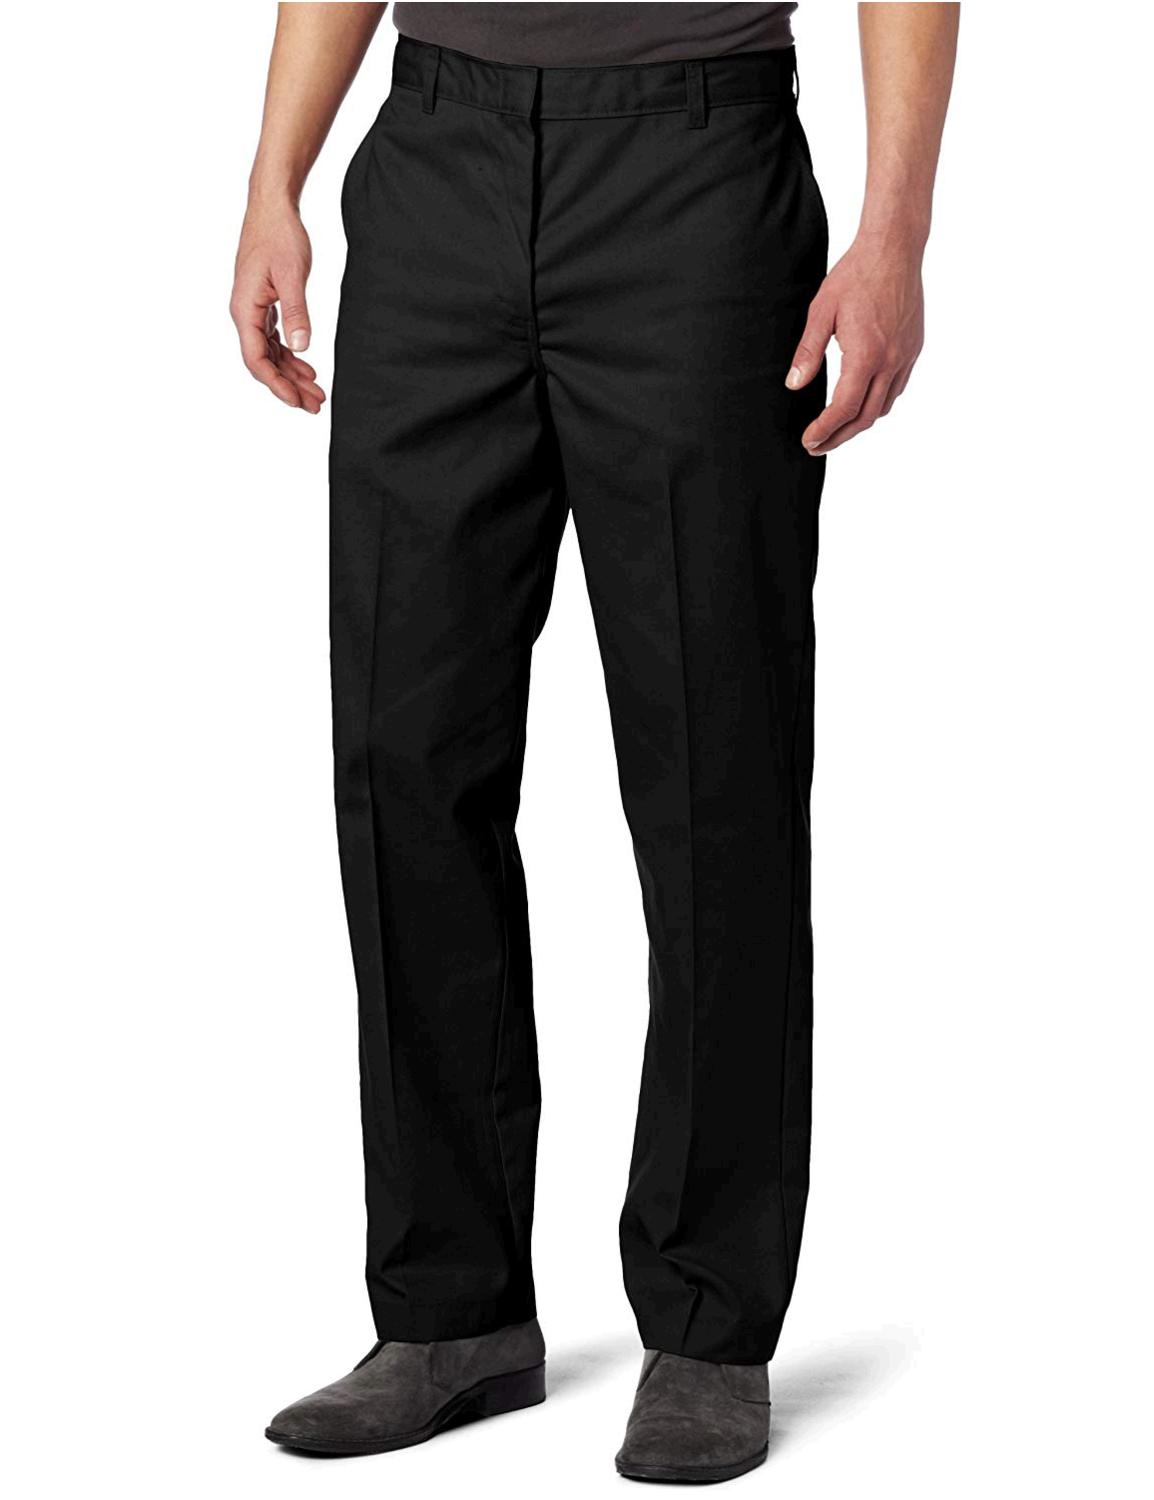 Dickies Men's Young Adult Sized Flat Front Pant, Black,, Black, Size ...